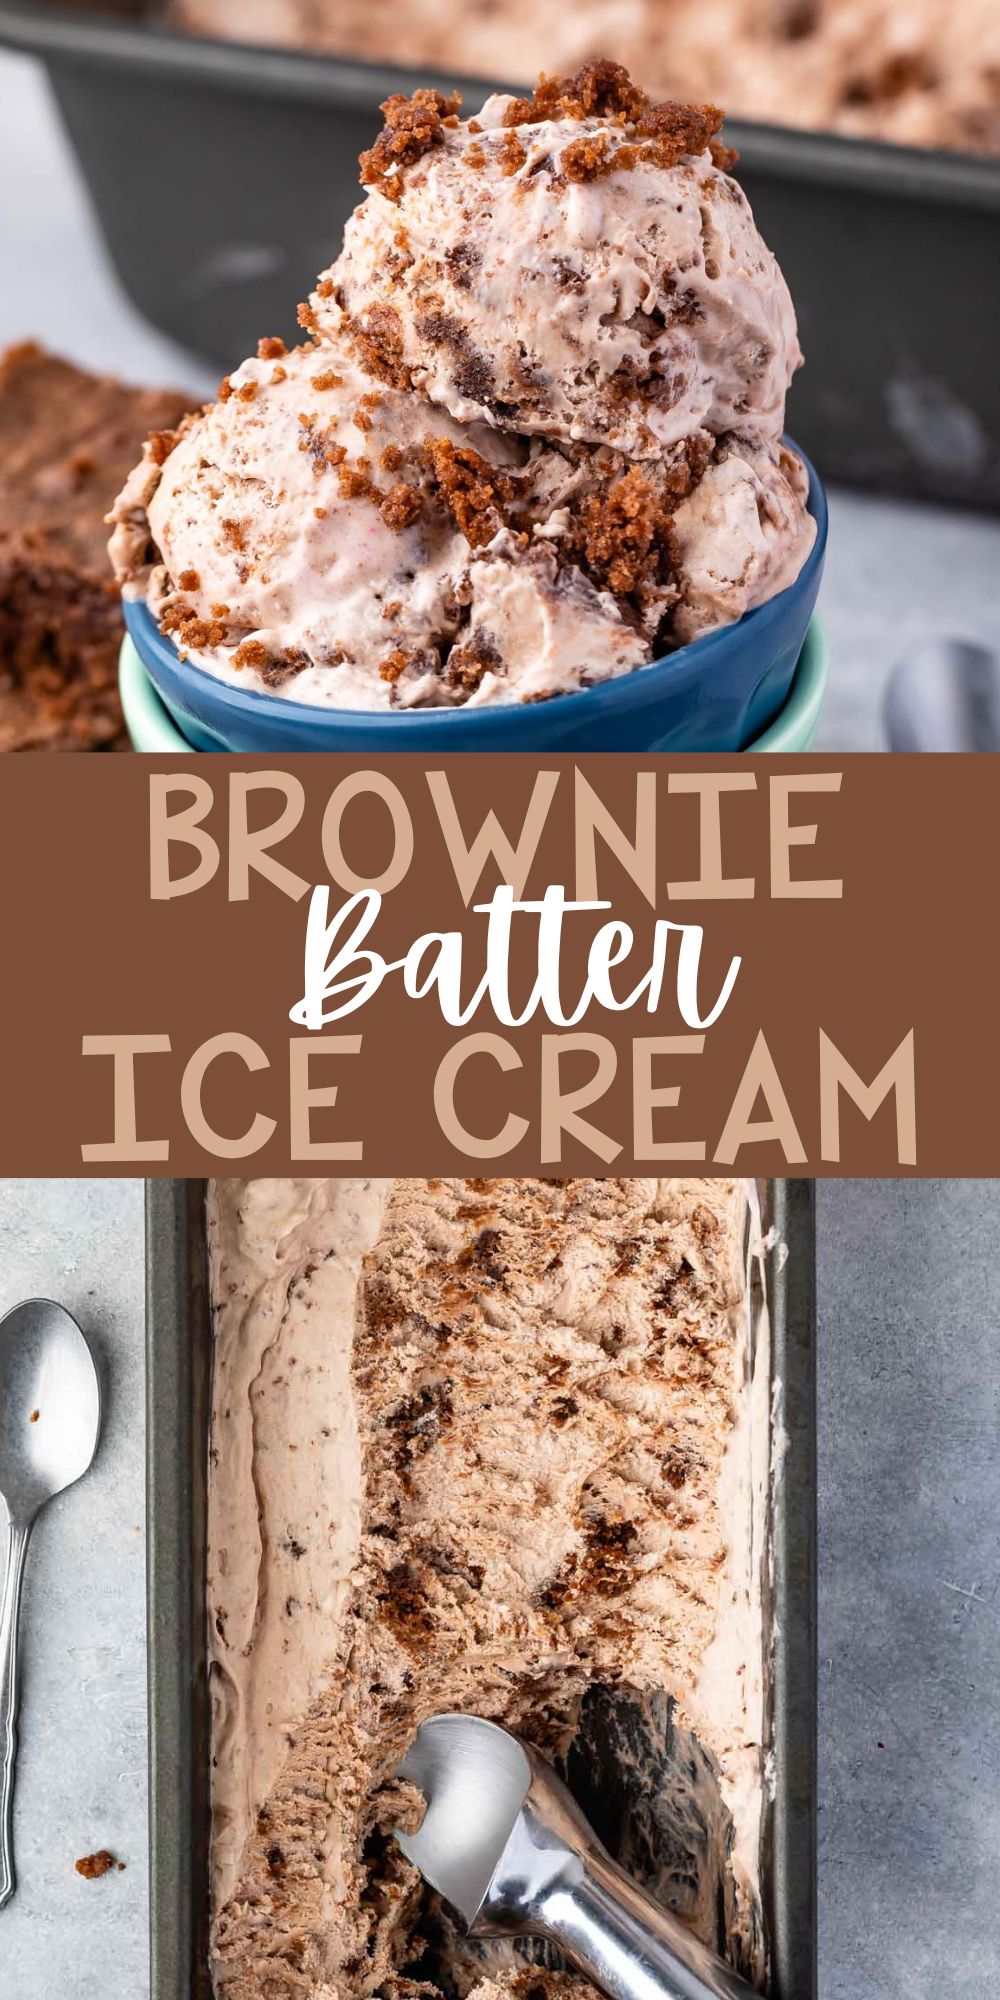 two photos of scoops of brown brownie batter ice cream in two stacked bowls with words on the image.